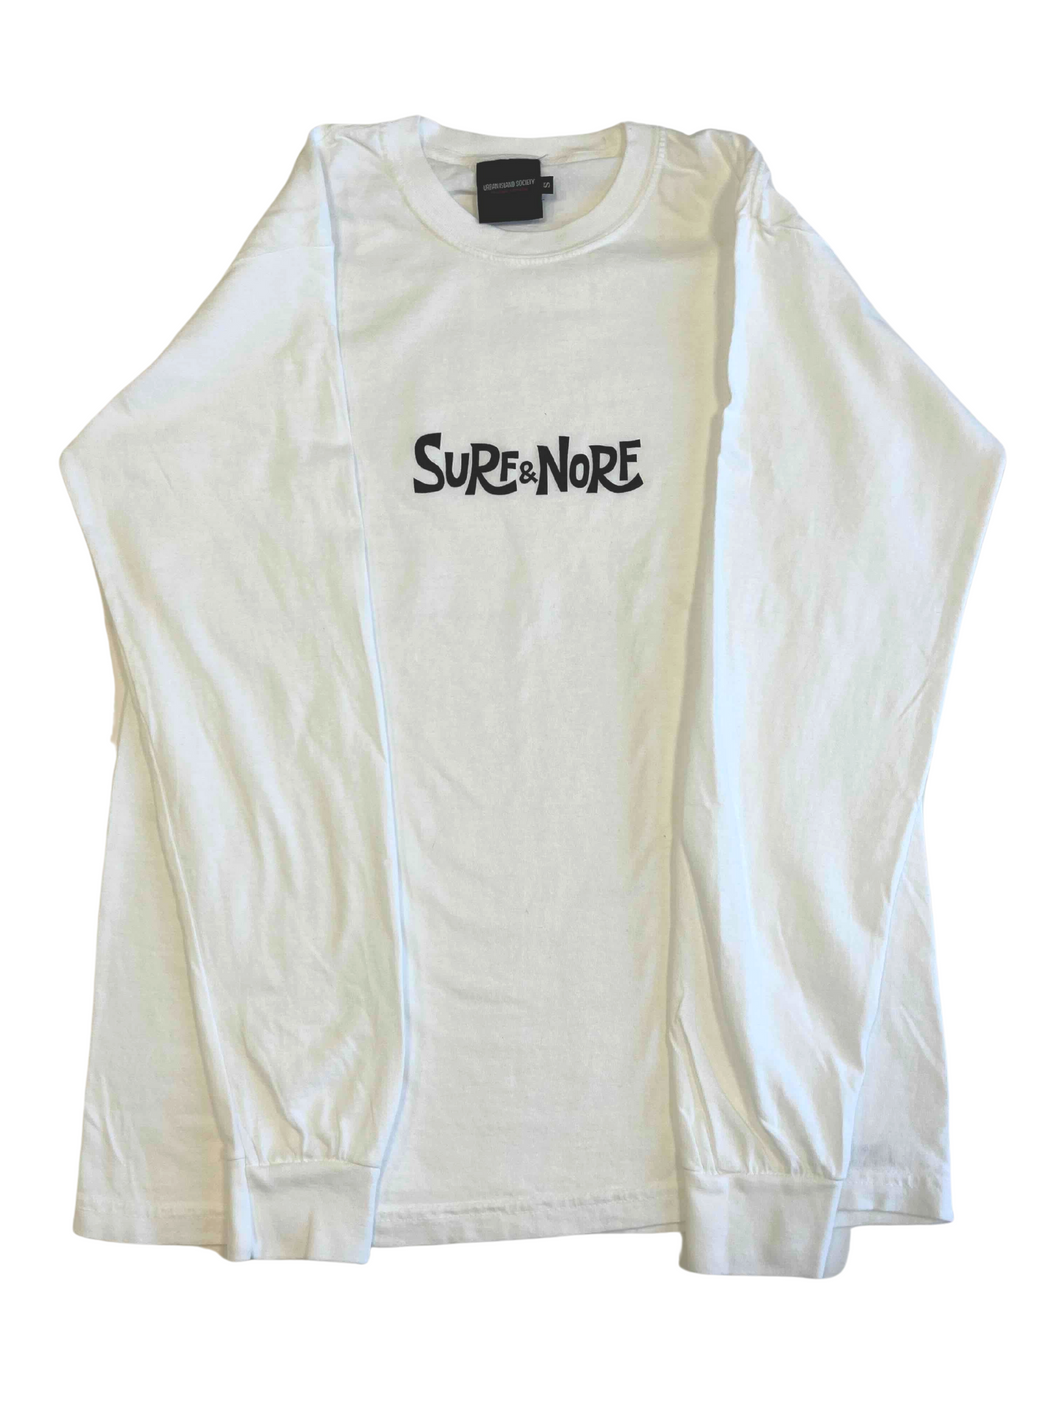 SURF & NORF LONG SLEEVE( WHITE )